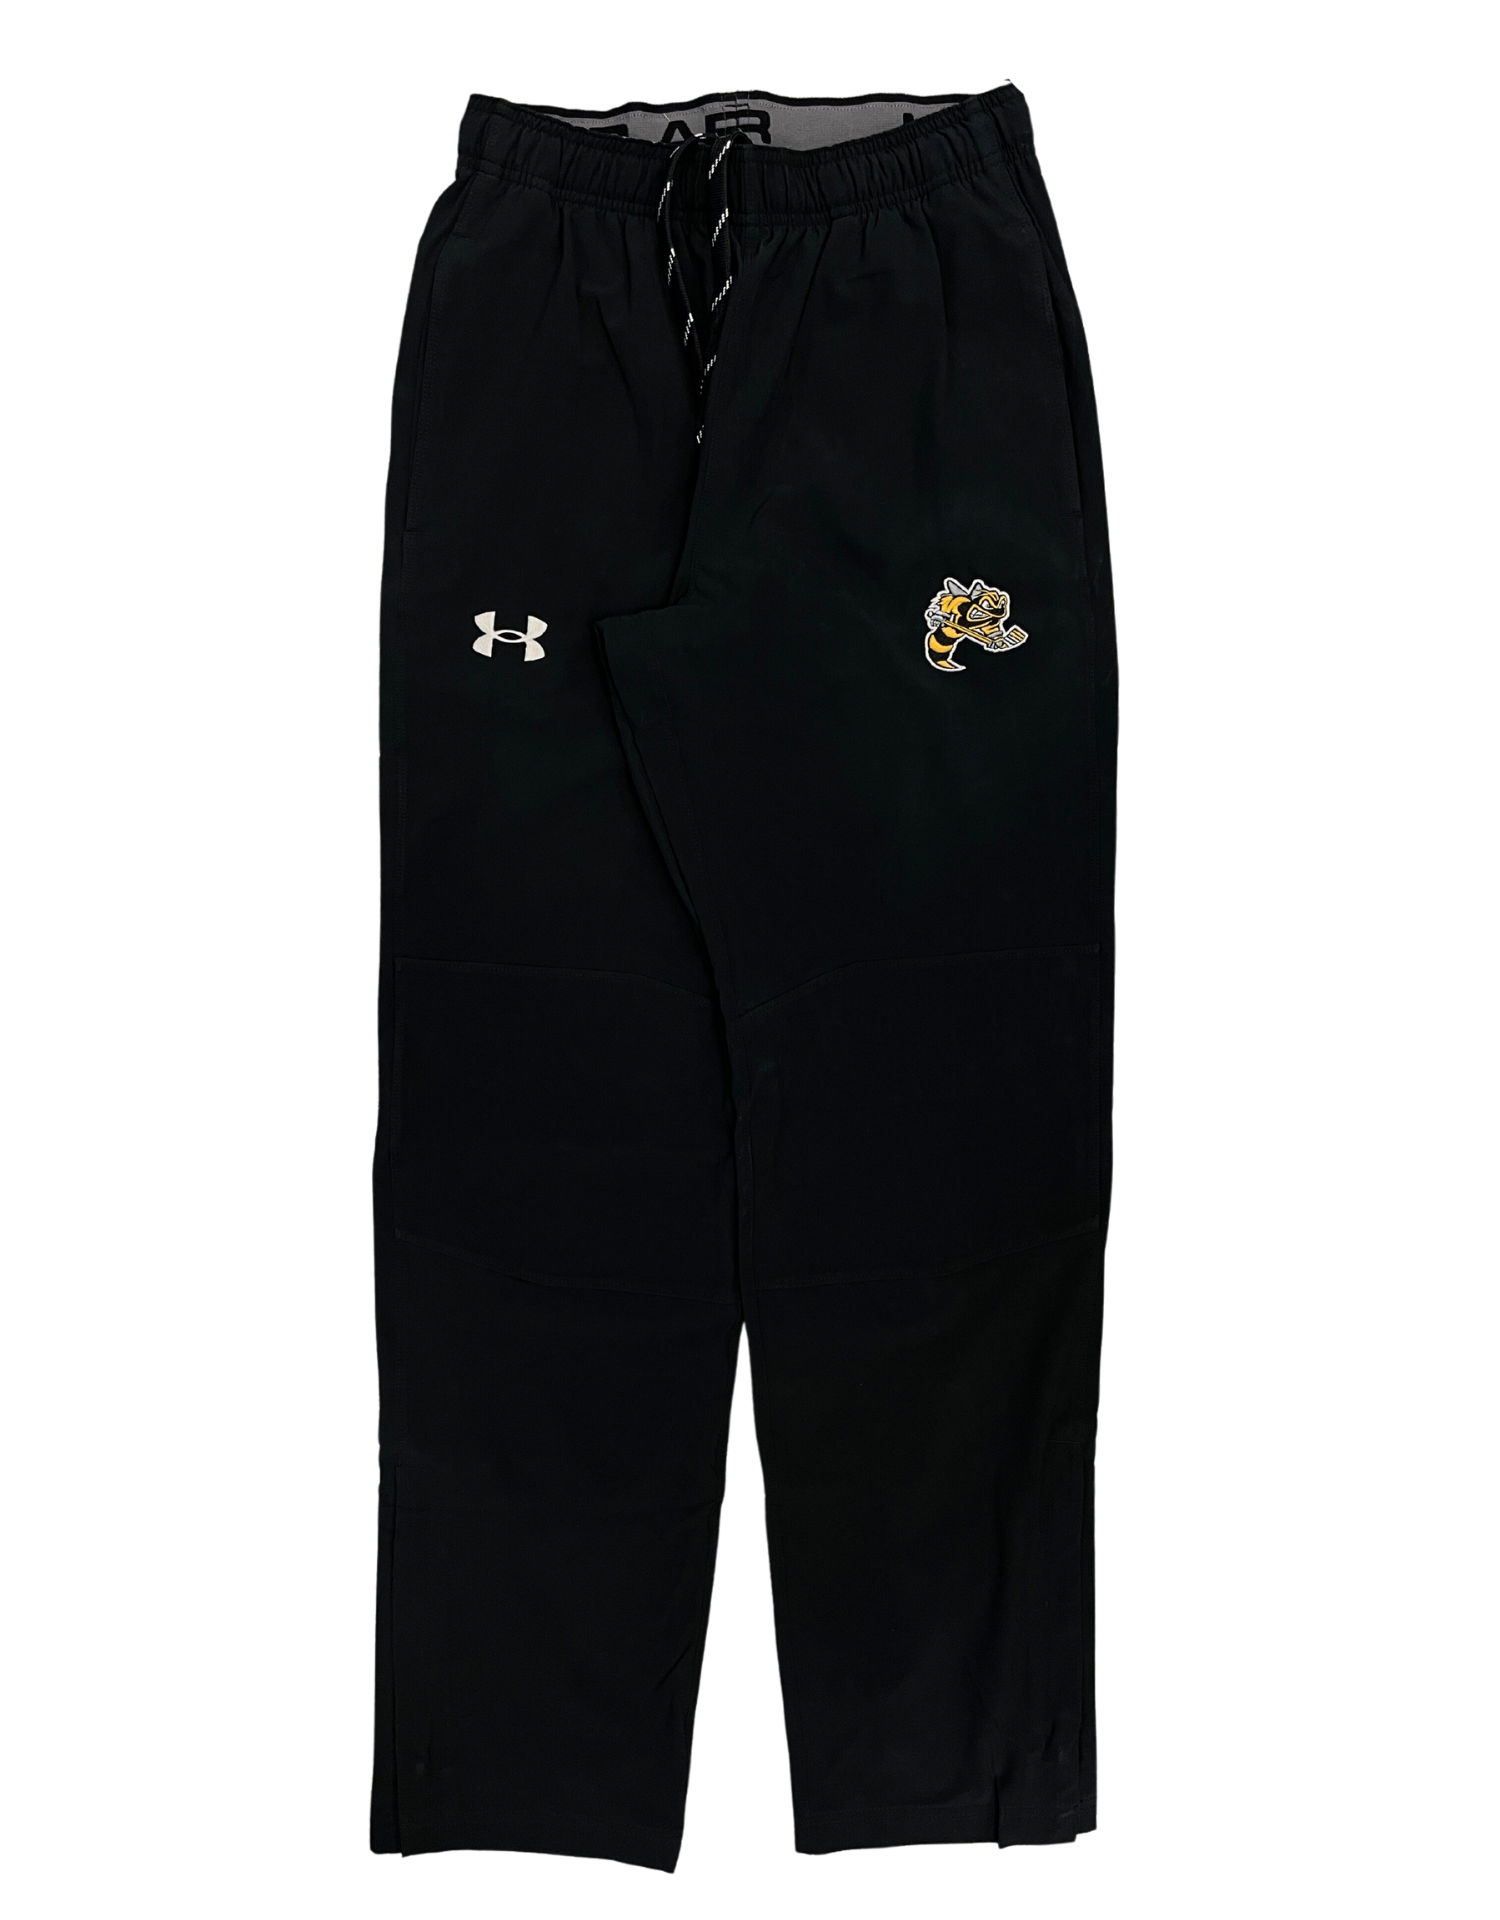 Under Armour Hockey Warm Up Pants